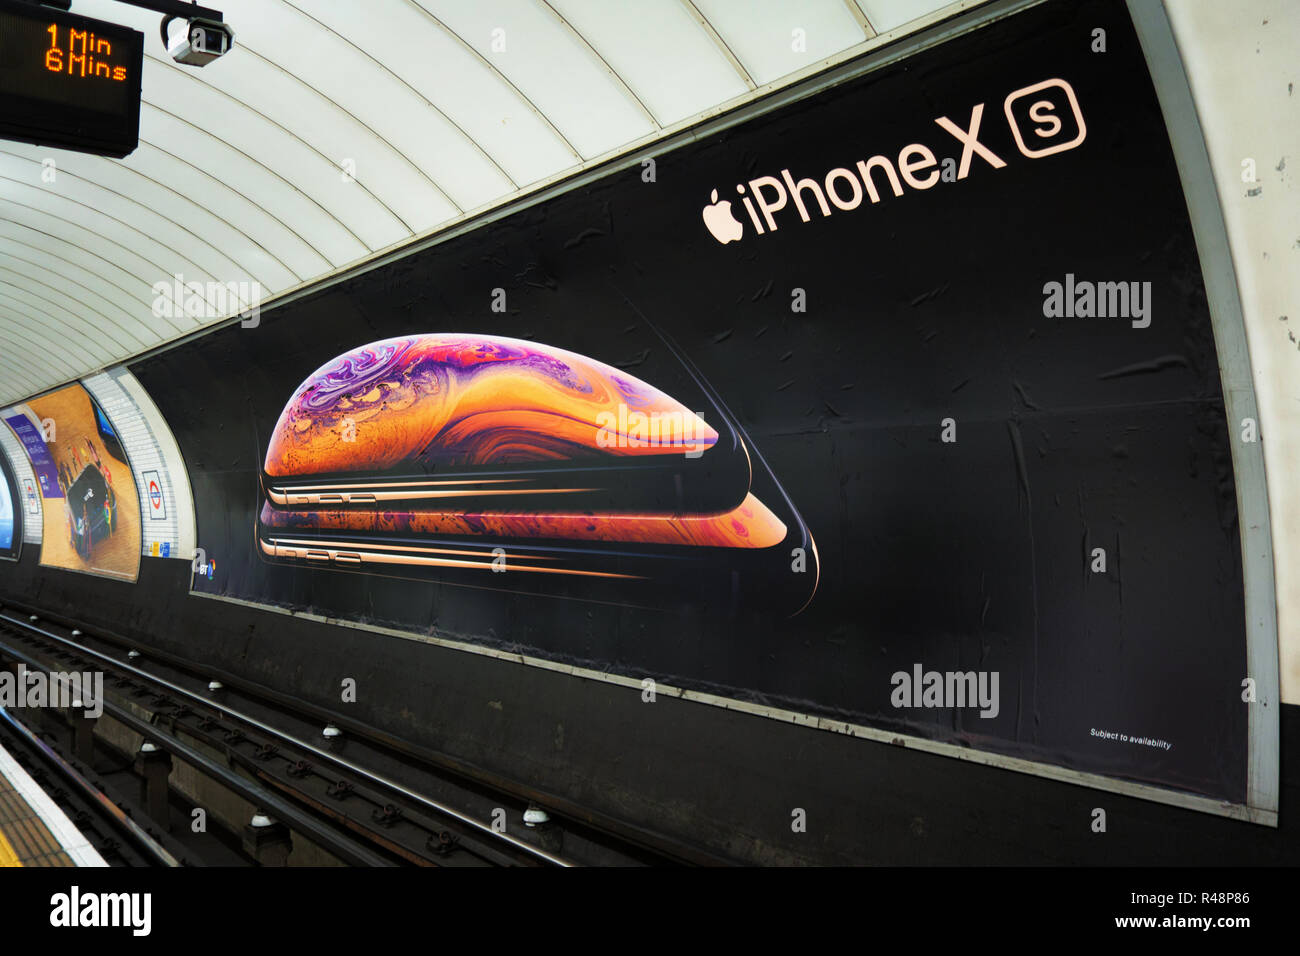 Apple iPhone XS, ad poster Advertising poster in the London Underground next the track Stock Photo Alamy